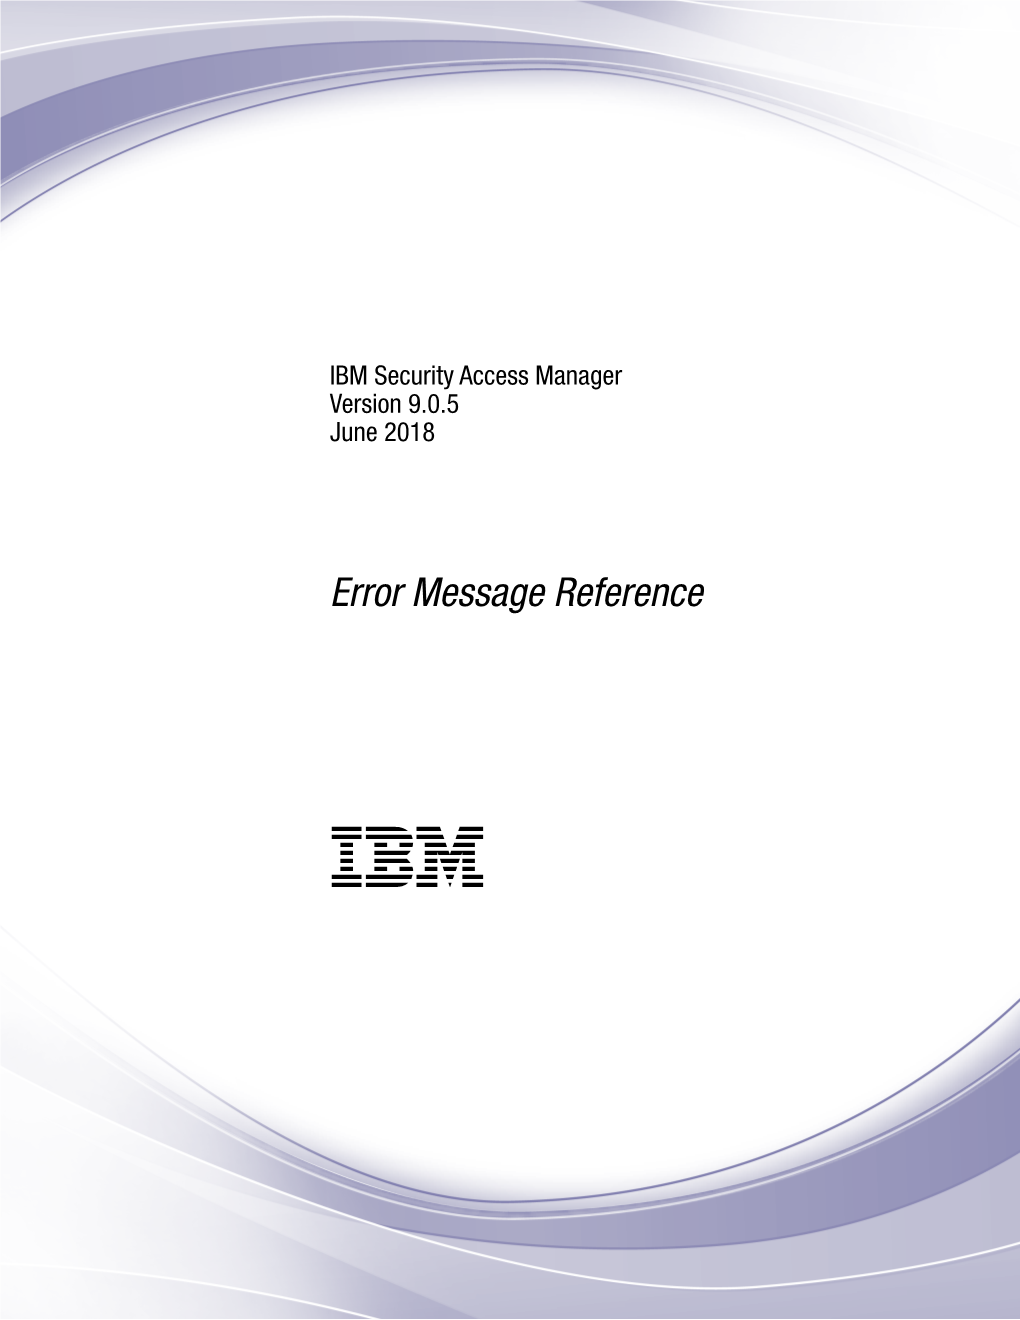 IBM Security Access Manager Version 9.0.5 June 2018: Error Message Reference Contents